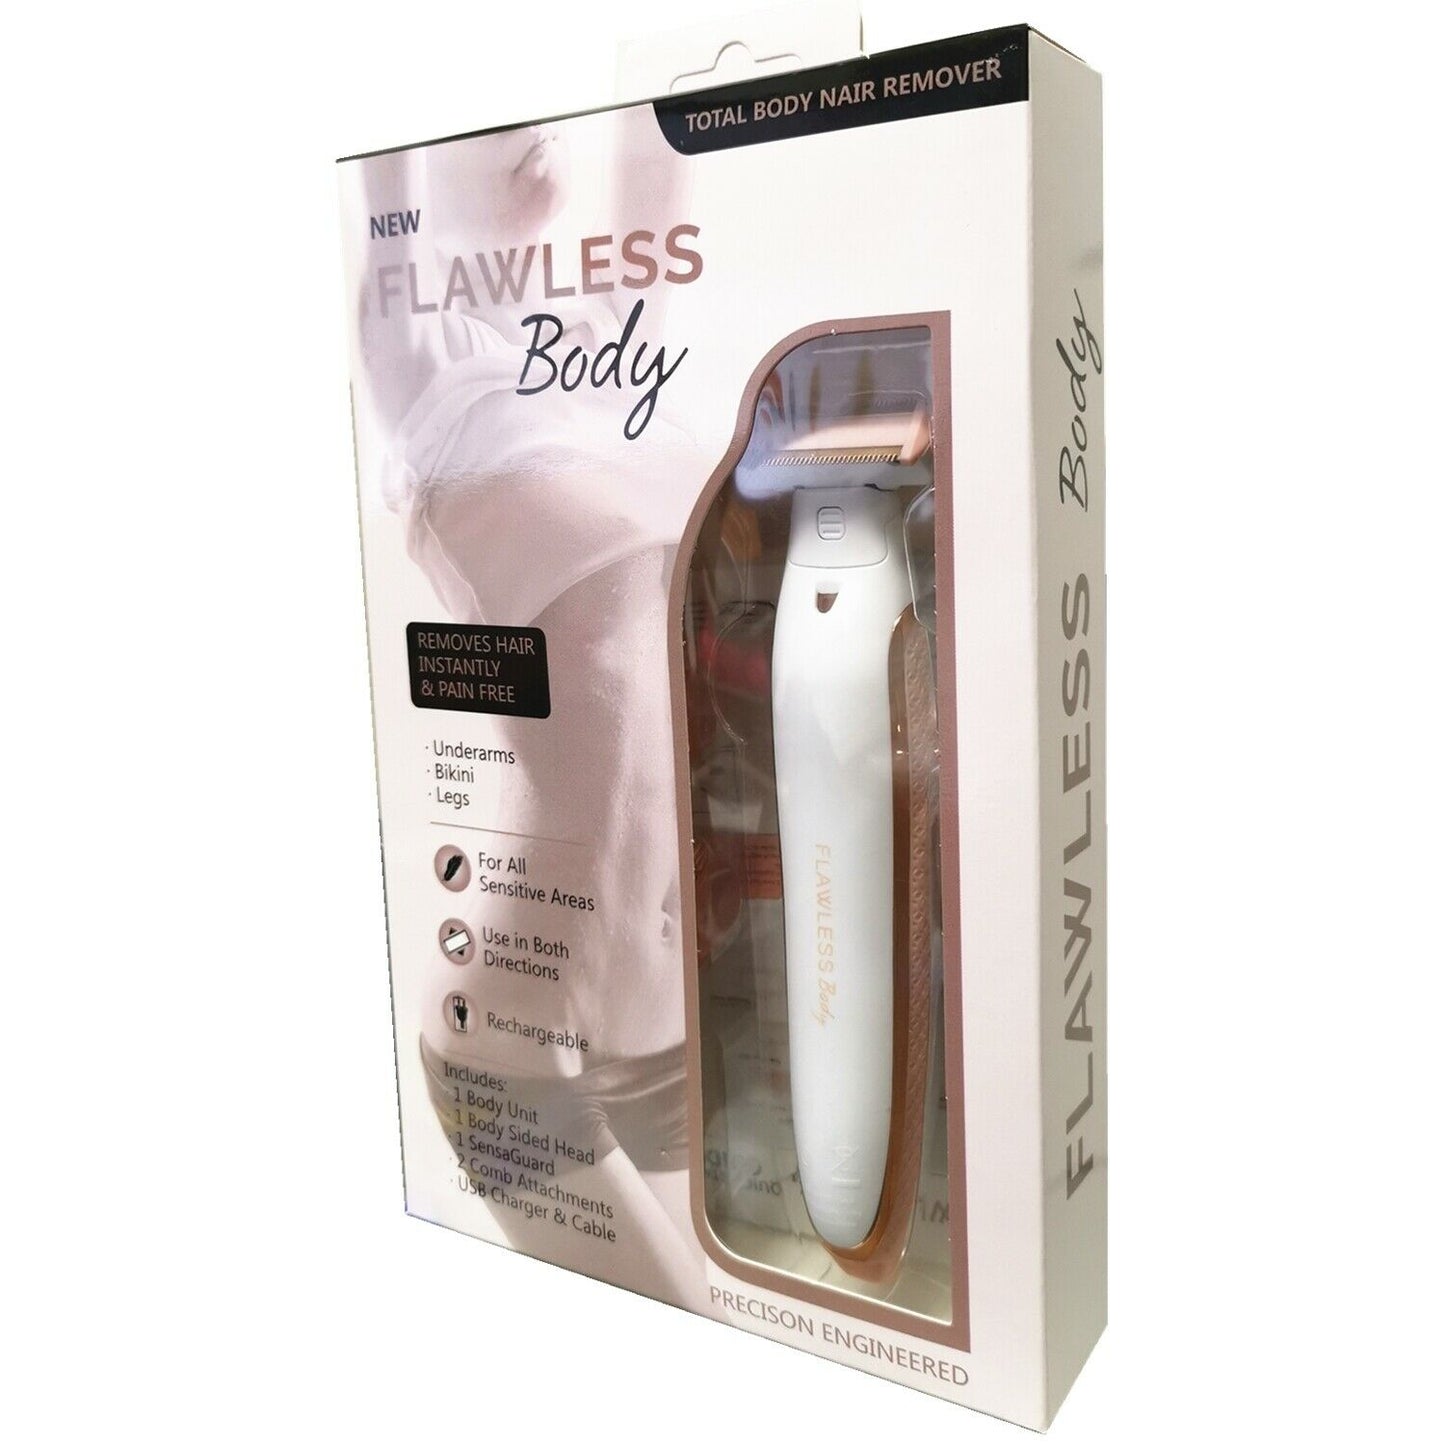 Women's Body hair Shaver Trimmer Portable Painless Rose Gold - Homeware Discounts